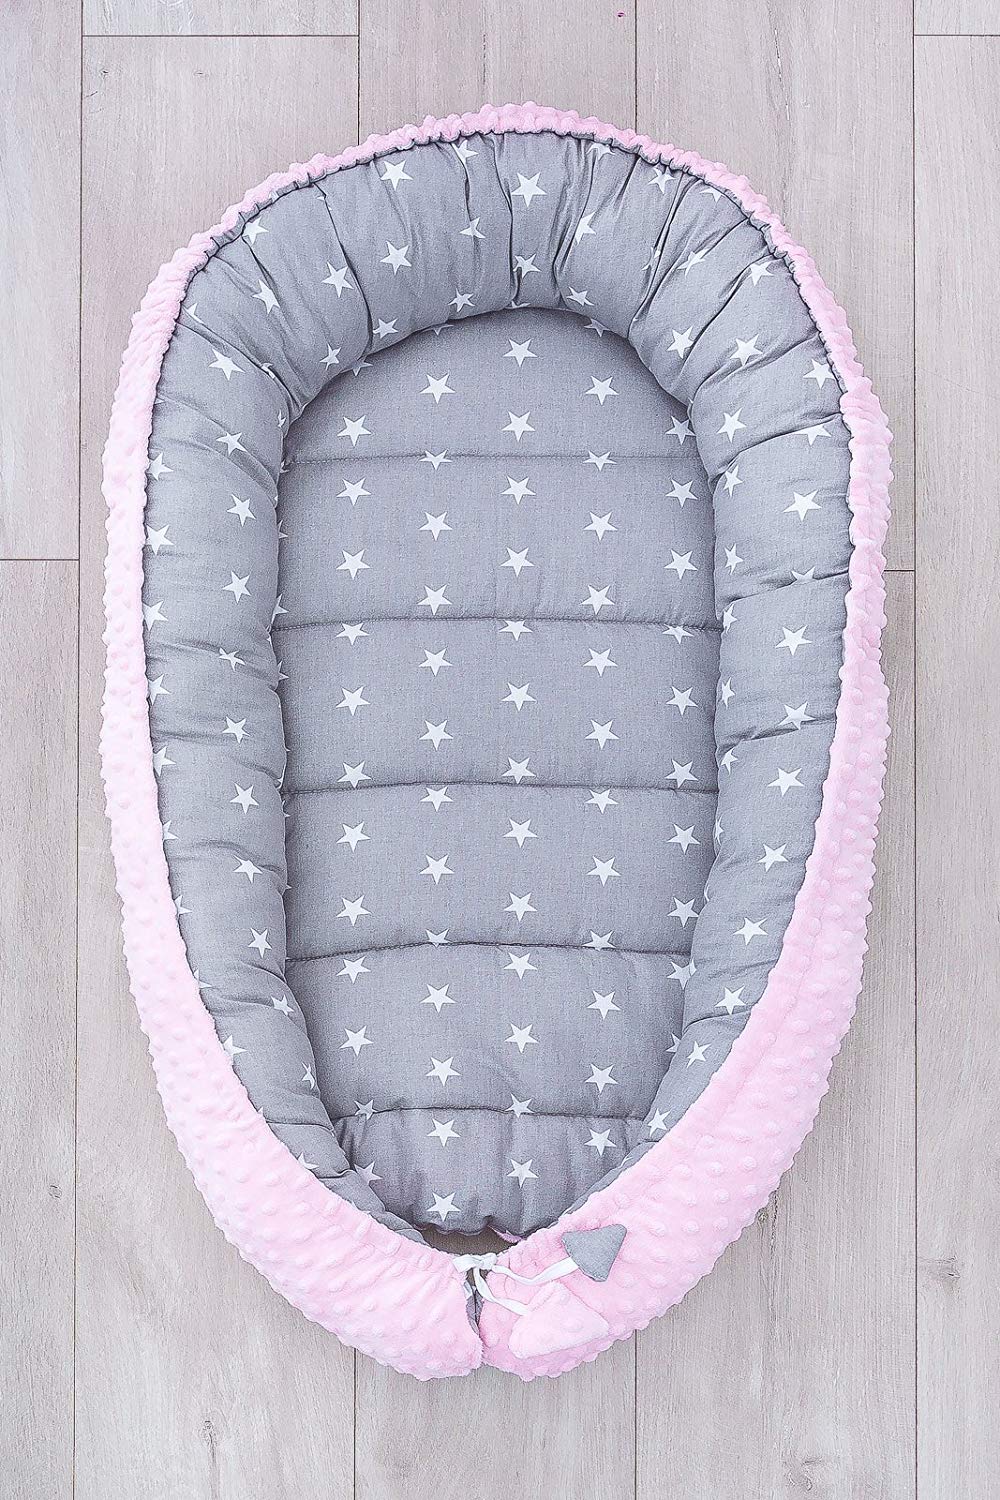 LOOLAY® Double-Sided Cocoon for Newborns Plush Minky Cot Bumper Baby Cocoon Cuddly Bed Baby Travel Cot Baby Cot for Babies Infants (Stars Grey/Minky Mint)